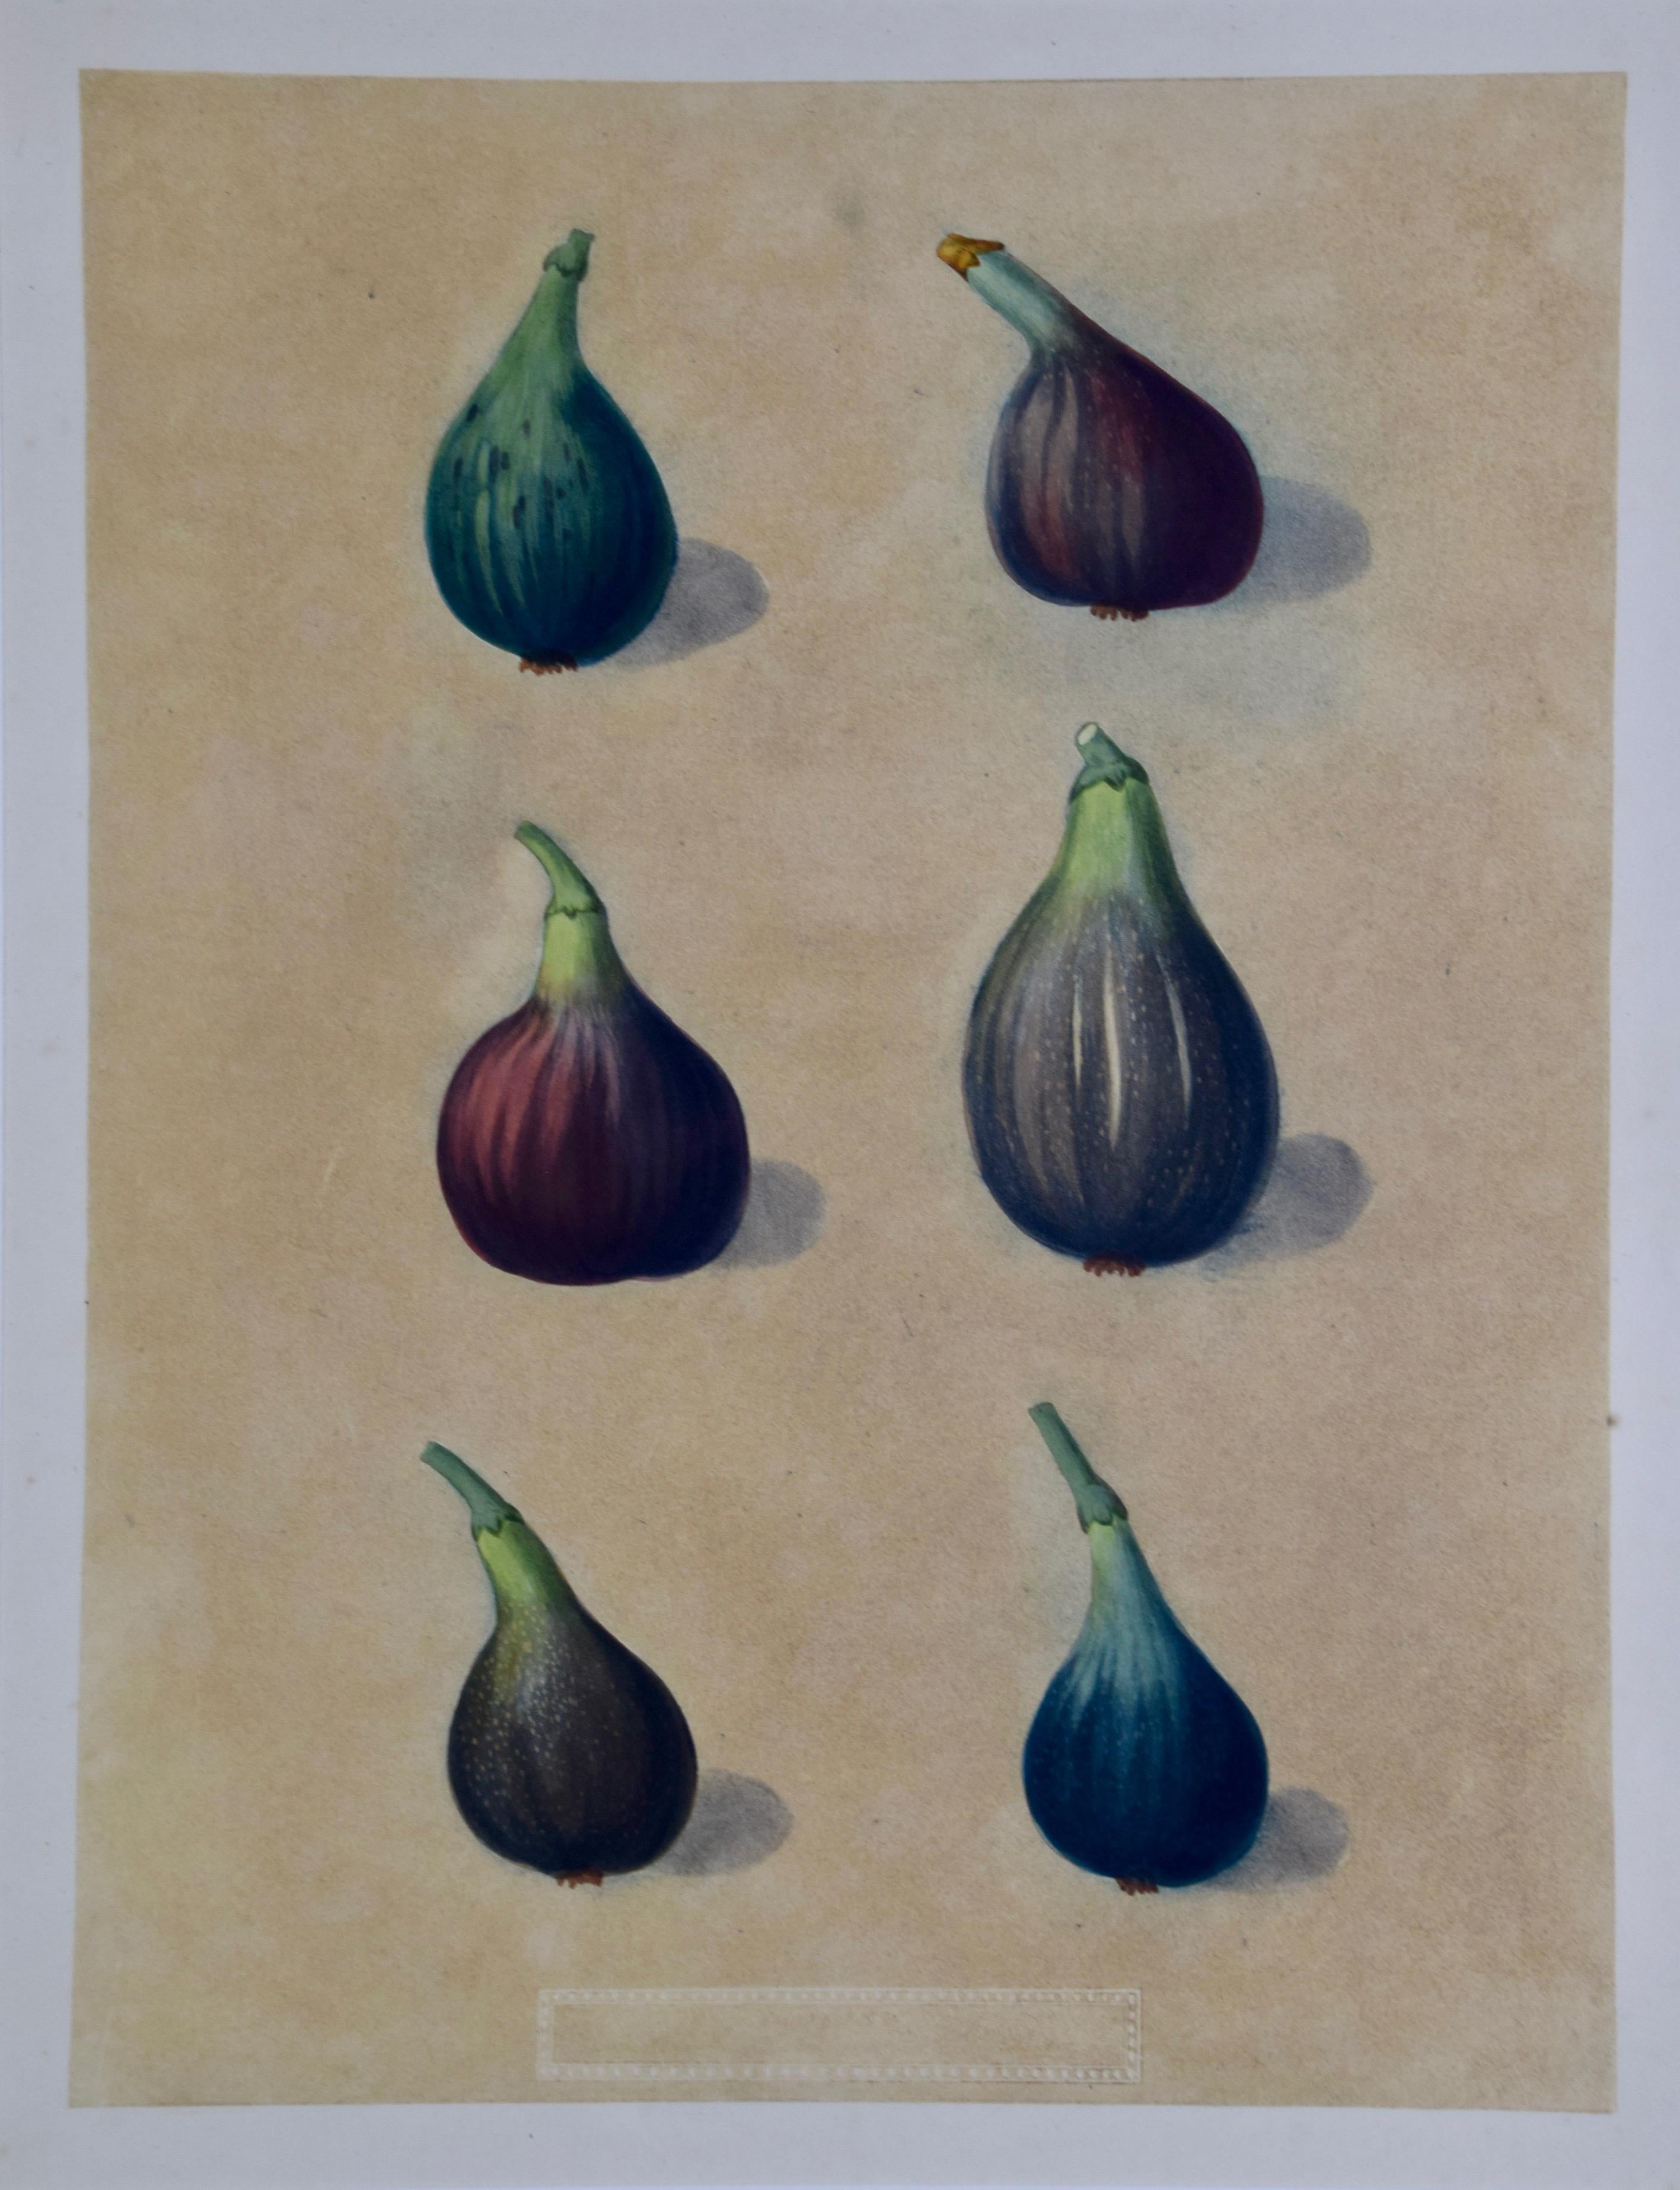 George Brookshaw's Matted Figs Aquatint from 